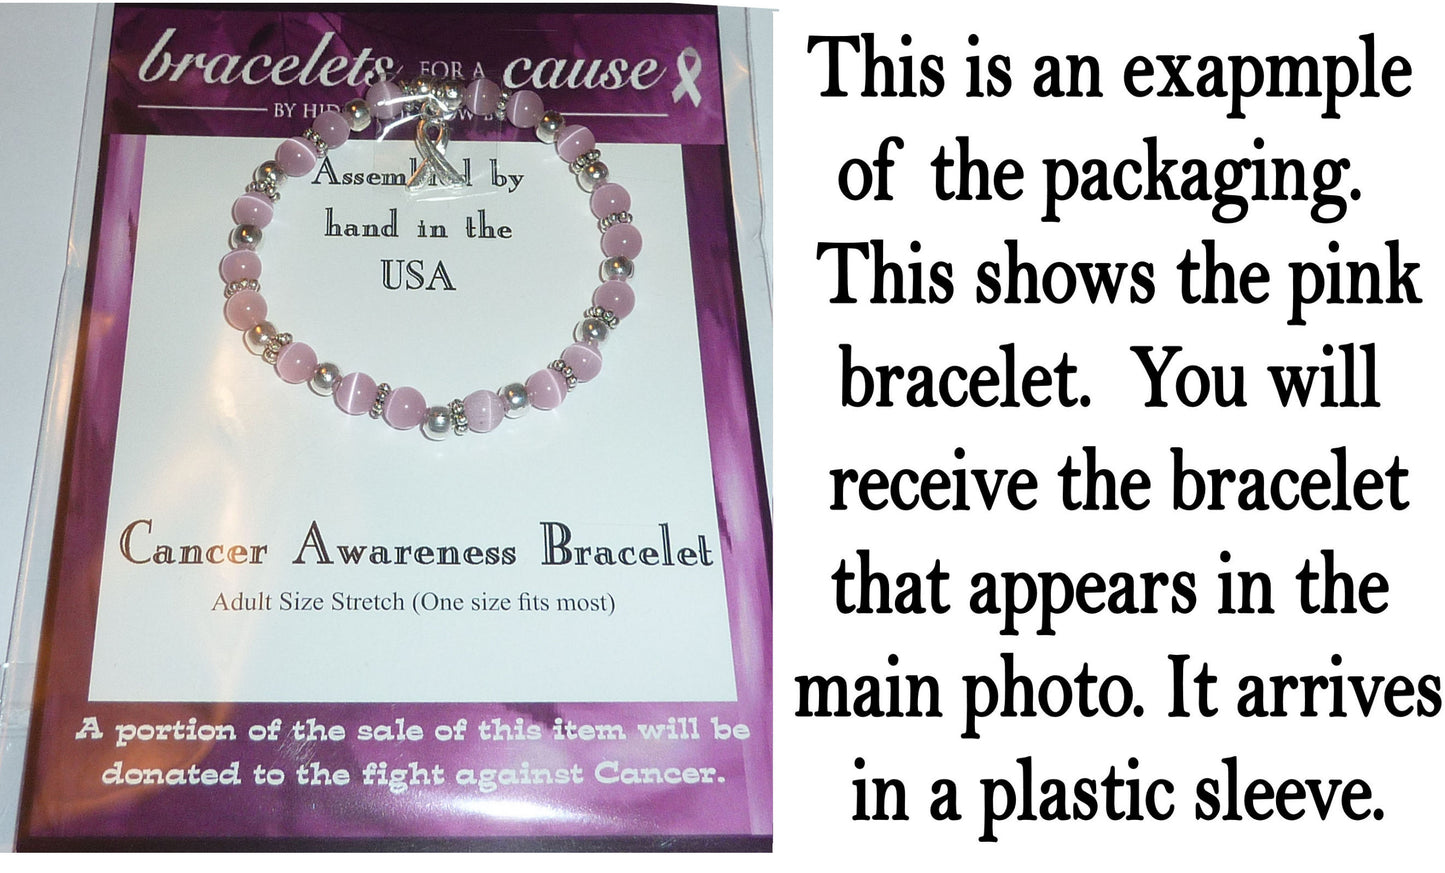 Peach (Uterine Cancer) Packaged Cancer Awareness Bracelet 6mm - Stretch (will stretch to fit most Adults)